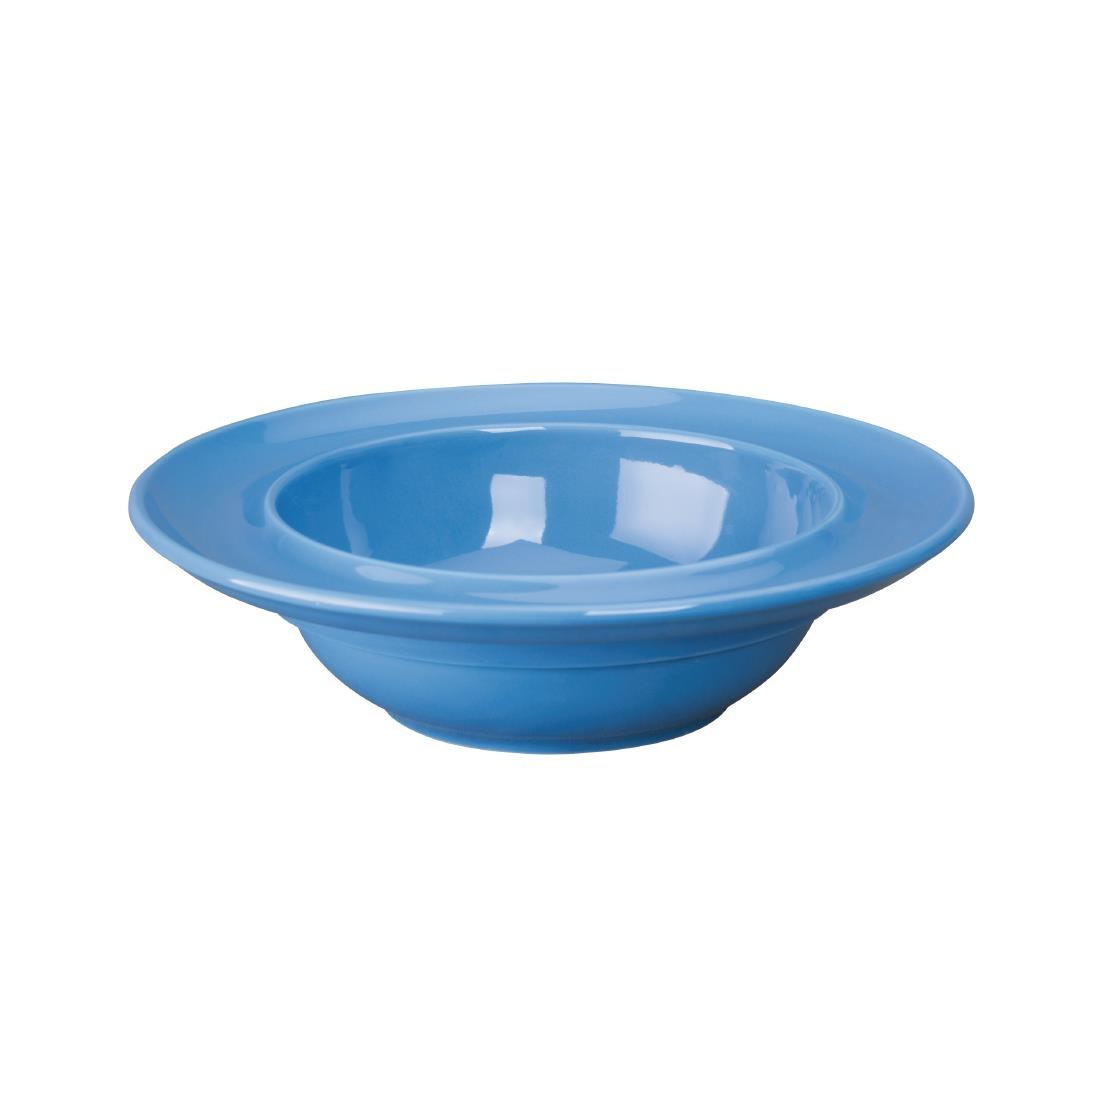 Olympia Kristallon HeritageRaised Rim Bowls Blue 205mm (Pack of 4) - DW702  - 3